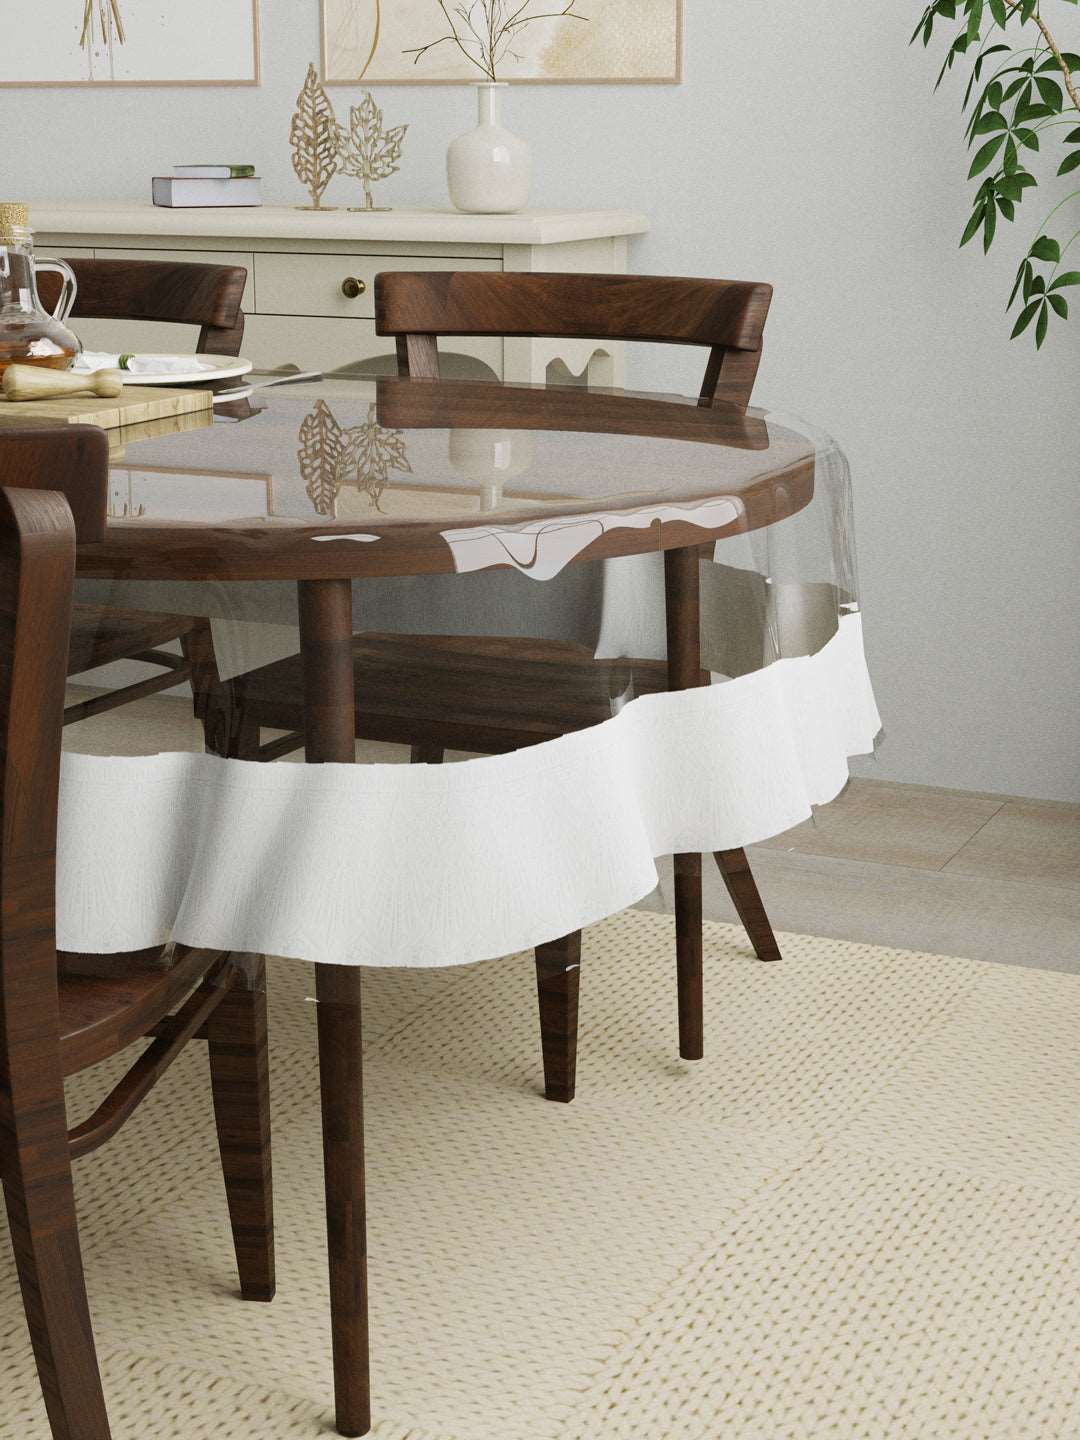 4 Seater Anti Slip Oval Transparent Table Cover 54x78 Inches ; White Lace